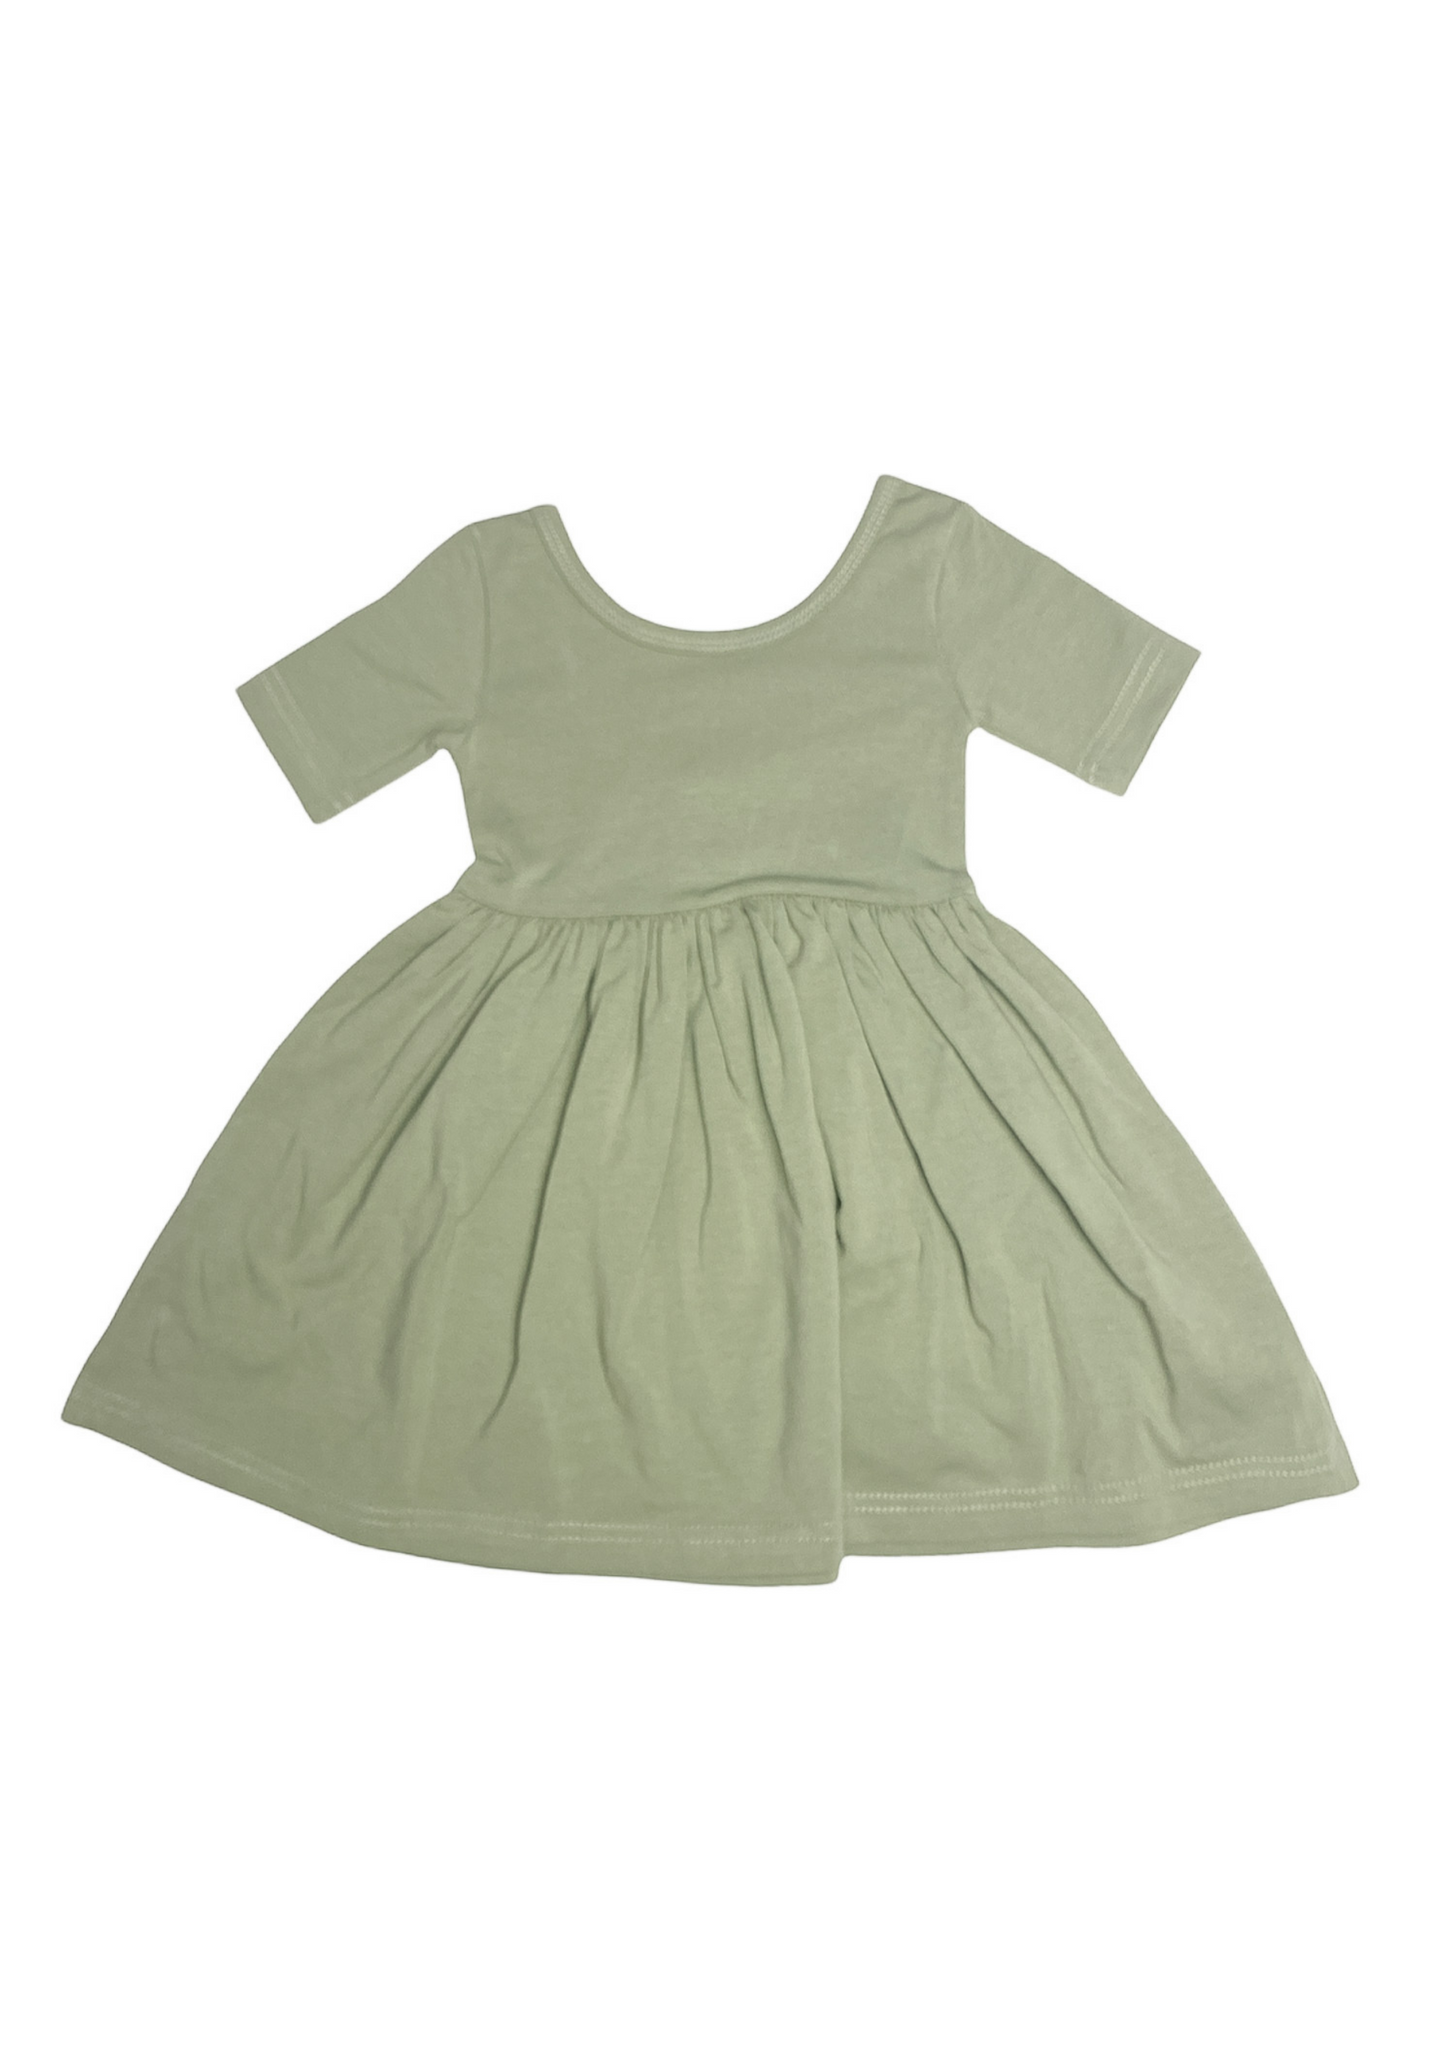 PLAY DRESS IN SAGE